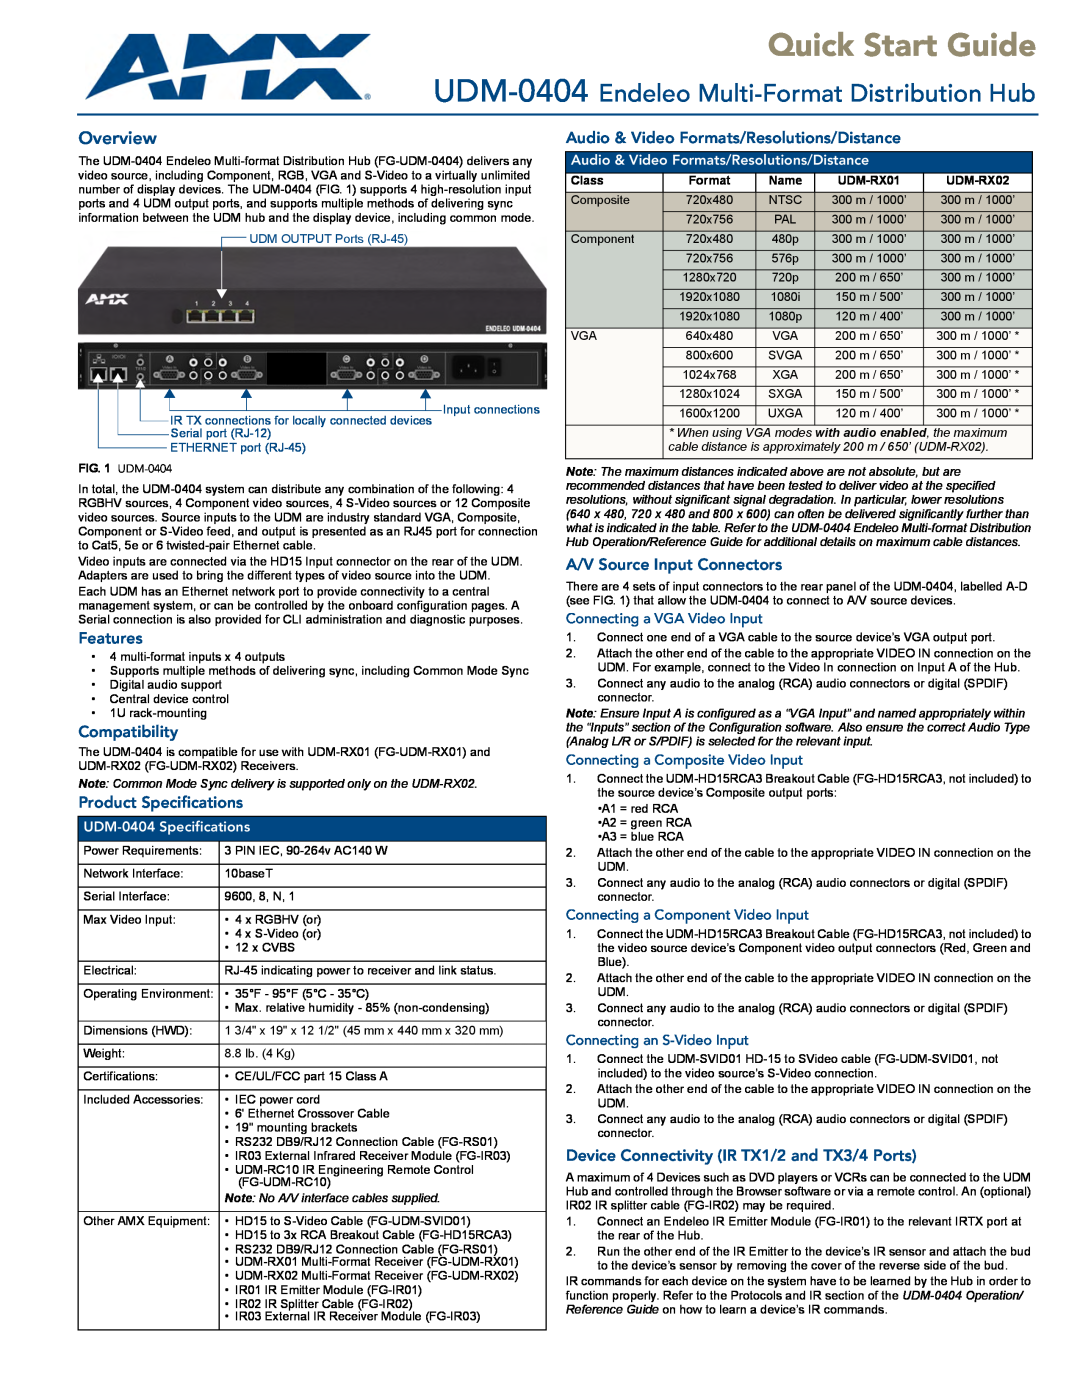 AMX UDM-0404 quick start Features, Compatibility, Product Specifications, Audio & Video Formats/Resolutions/Distance, Name 